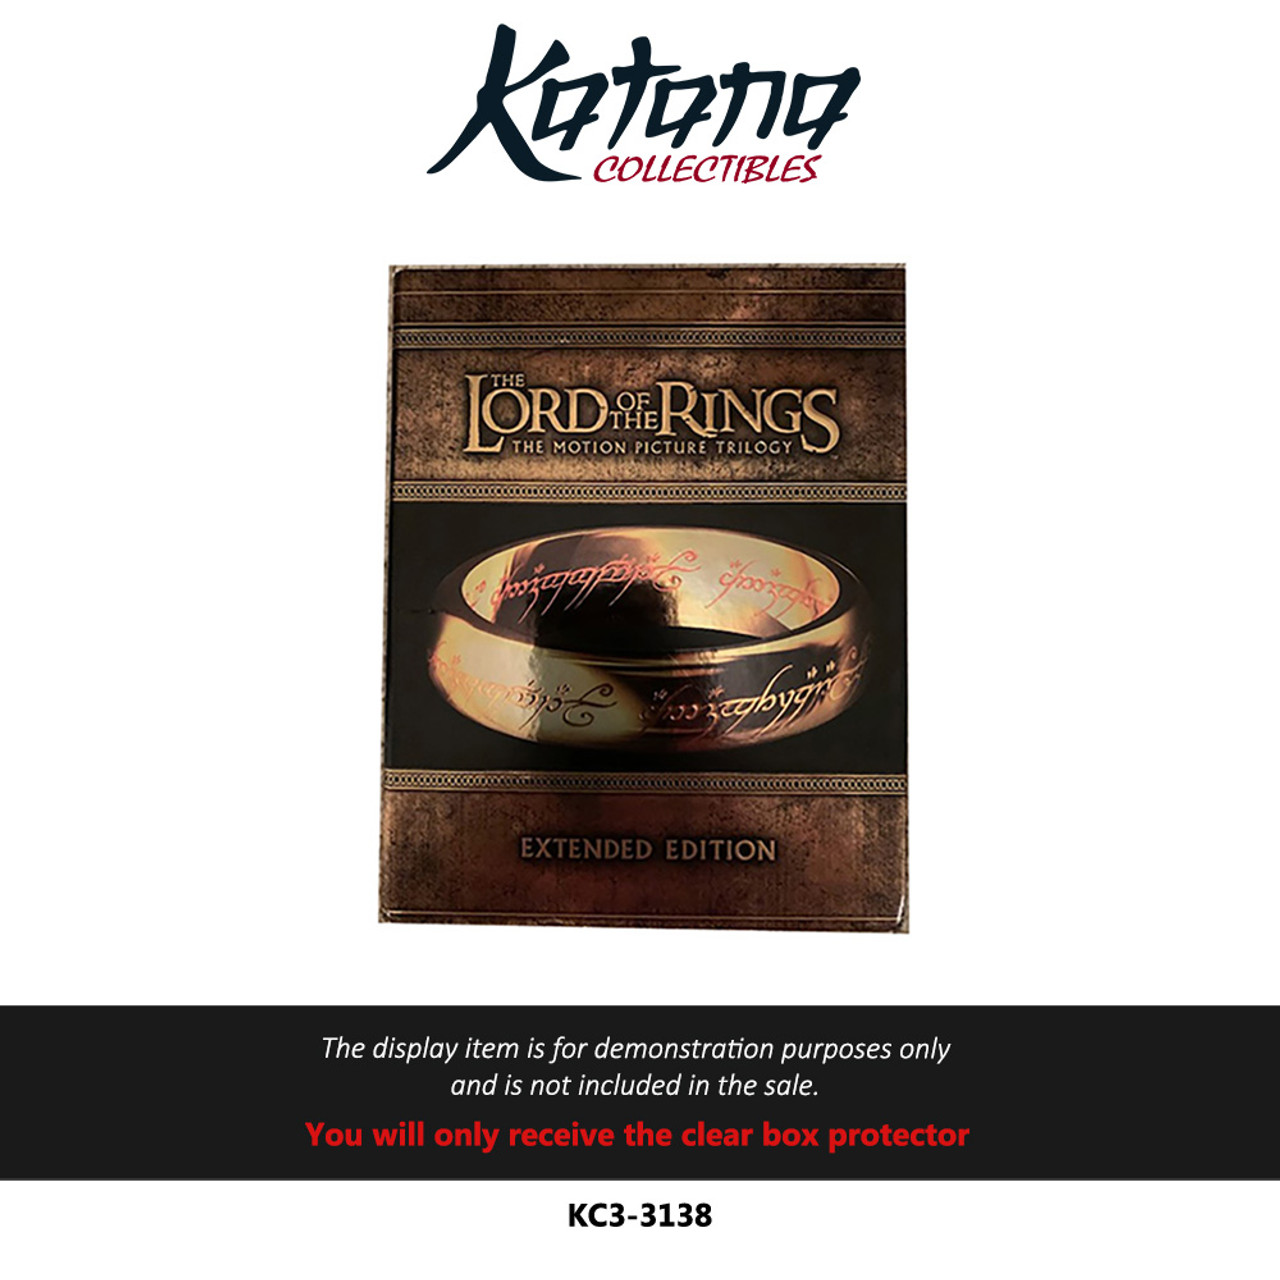 Katana Collectibles Protector For The Lord of the Rings Extended Edition